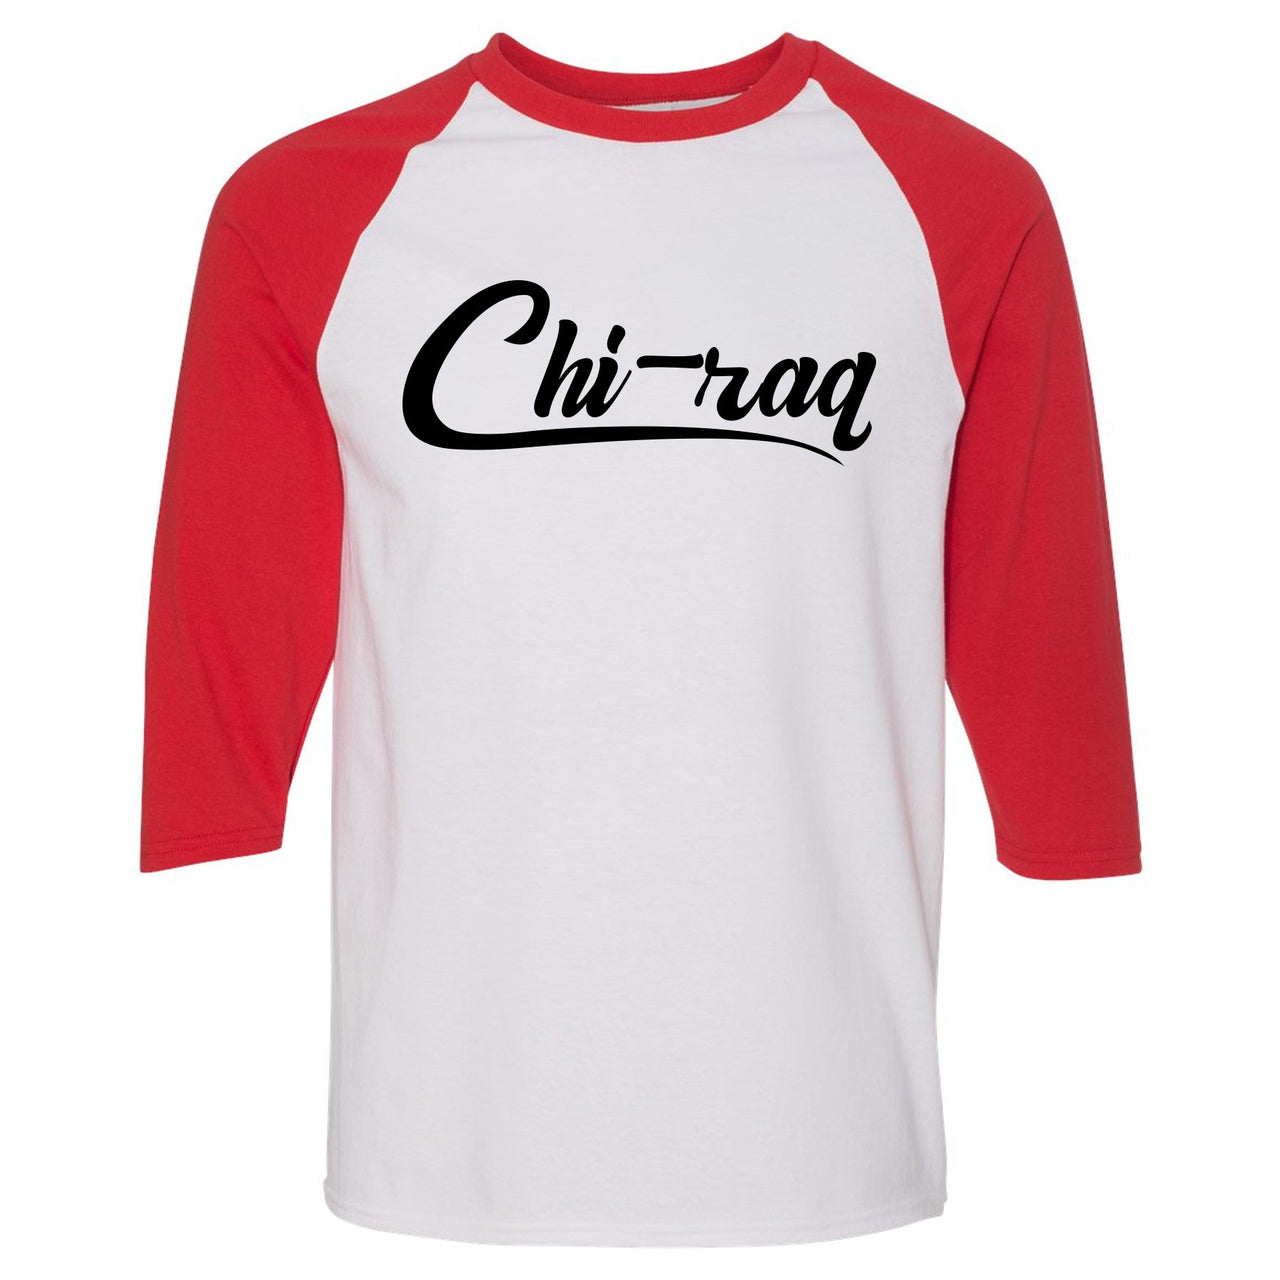 Reflections of a Champion 8s Raglan T Shirt | Chiraq Script, White and Red